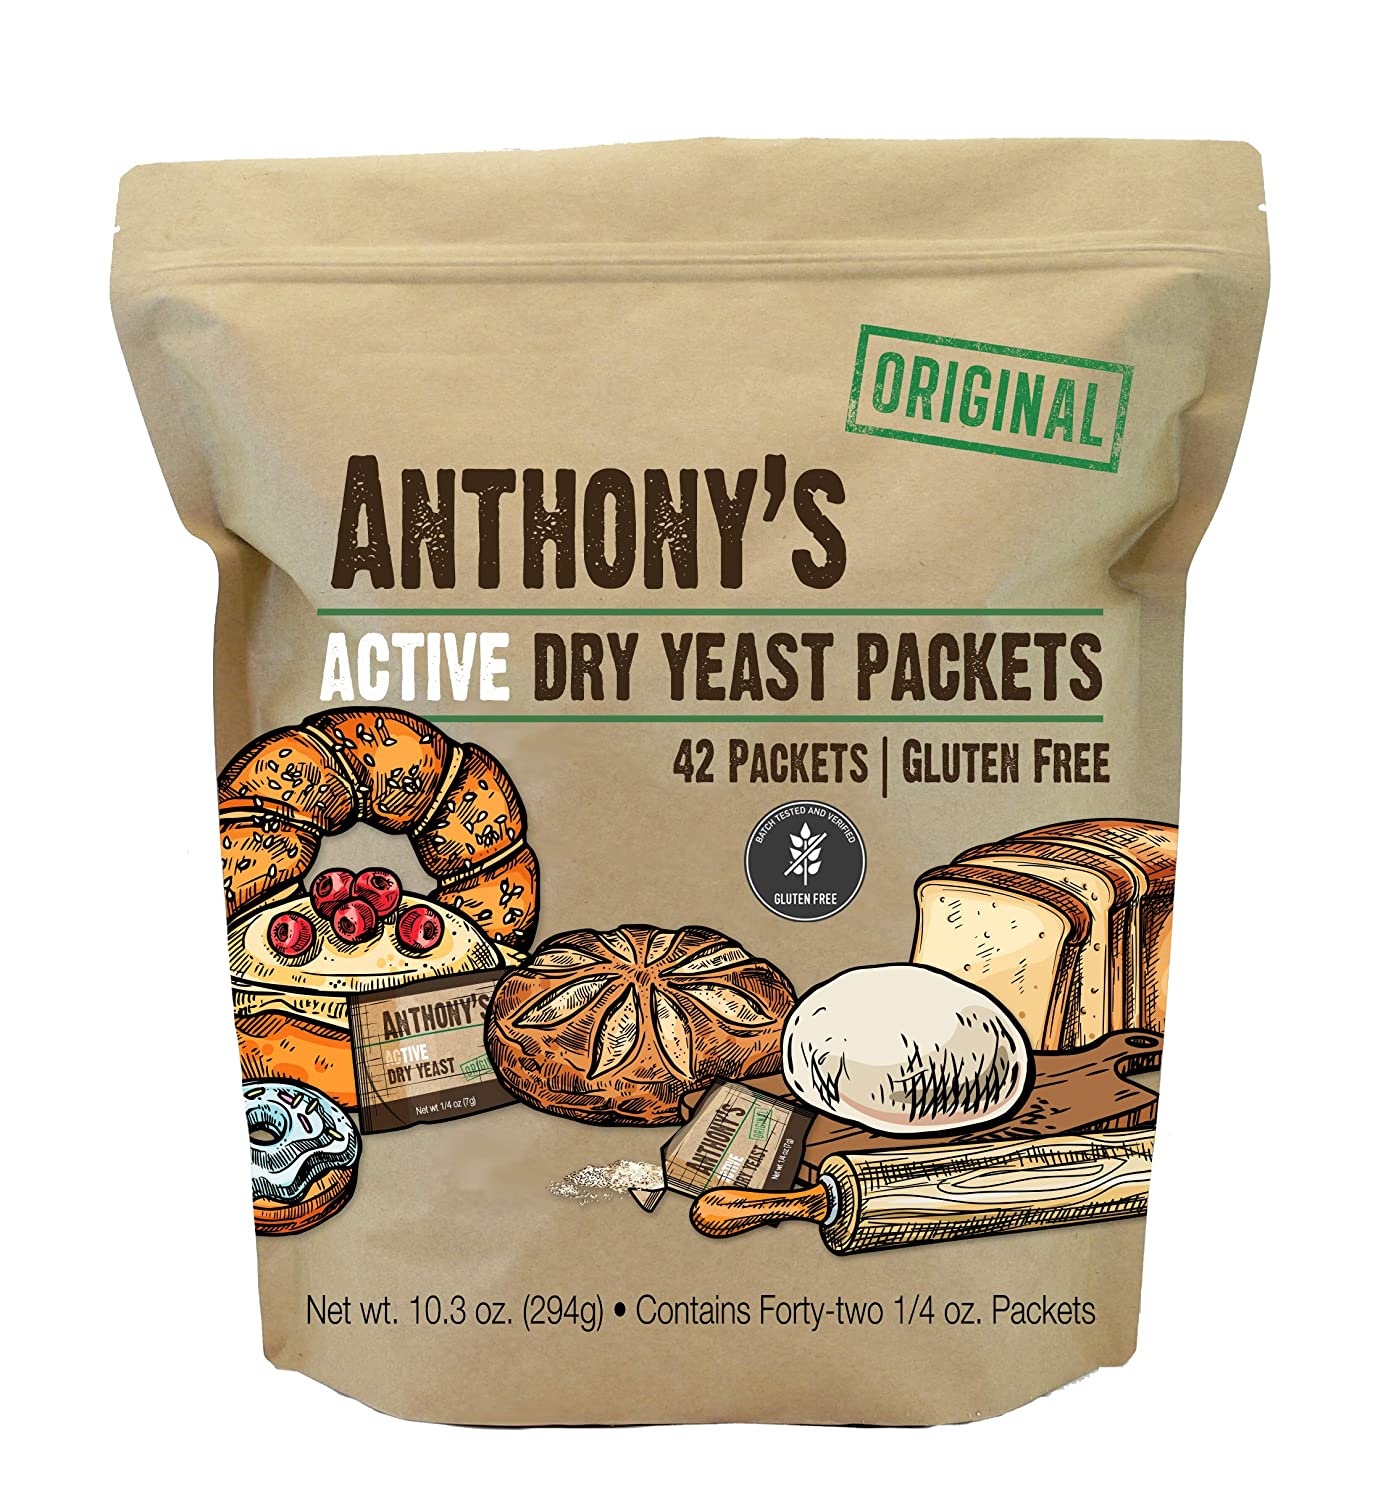 Active Dry Yeast Packets: Gluten Free